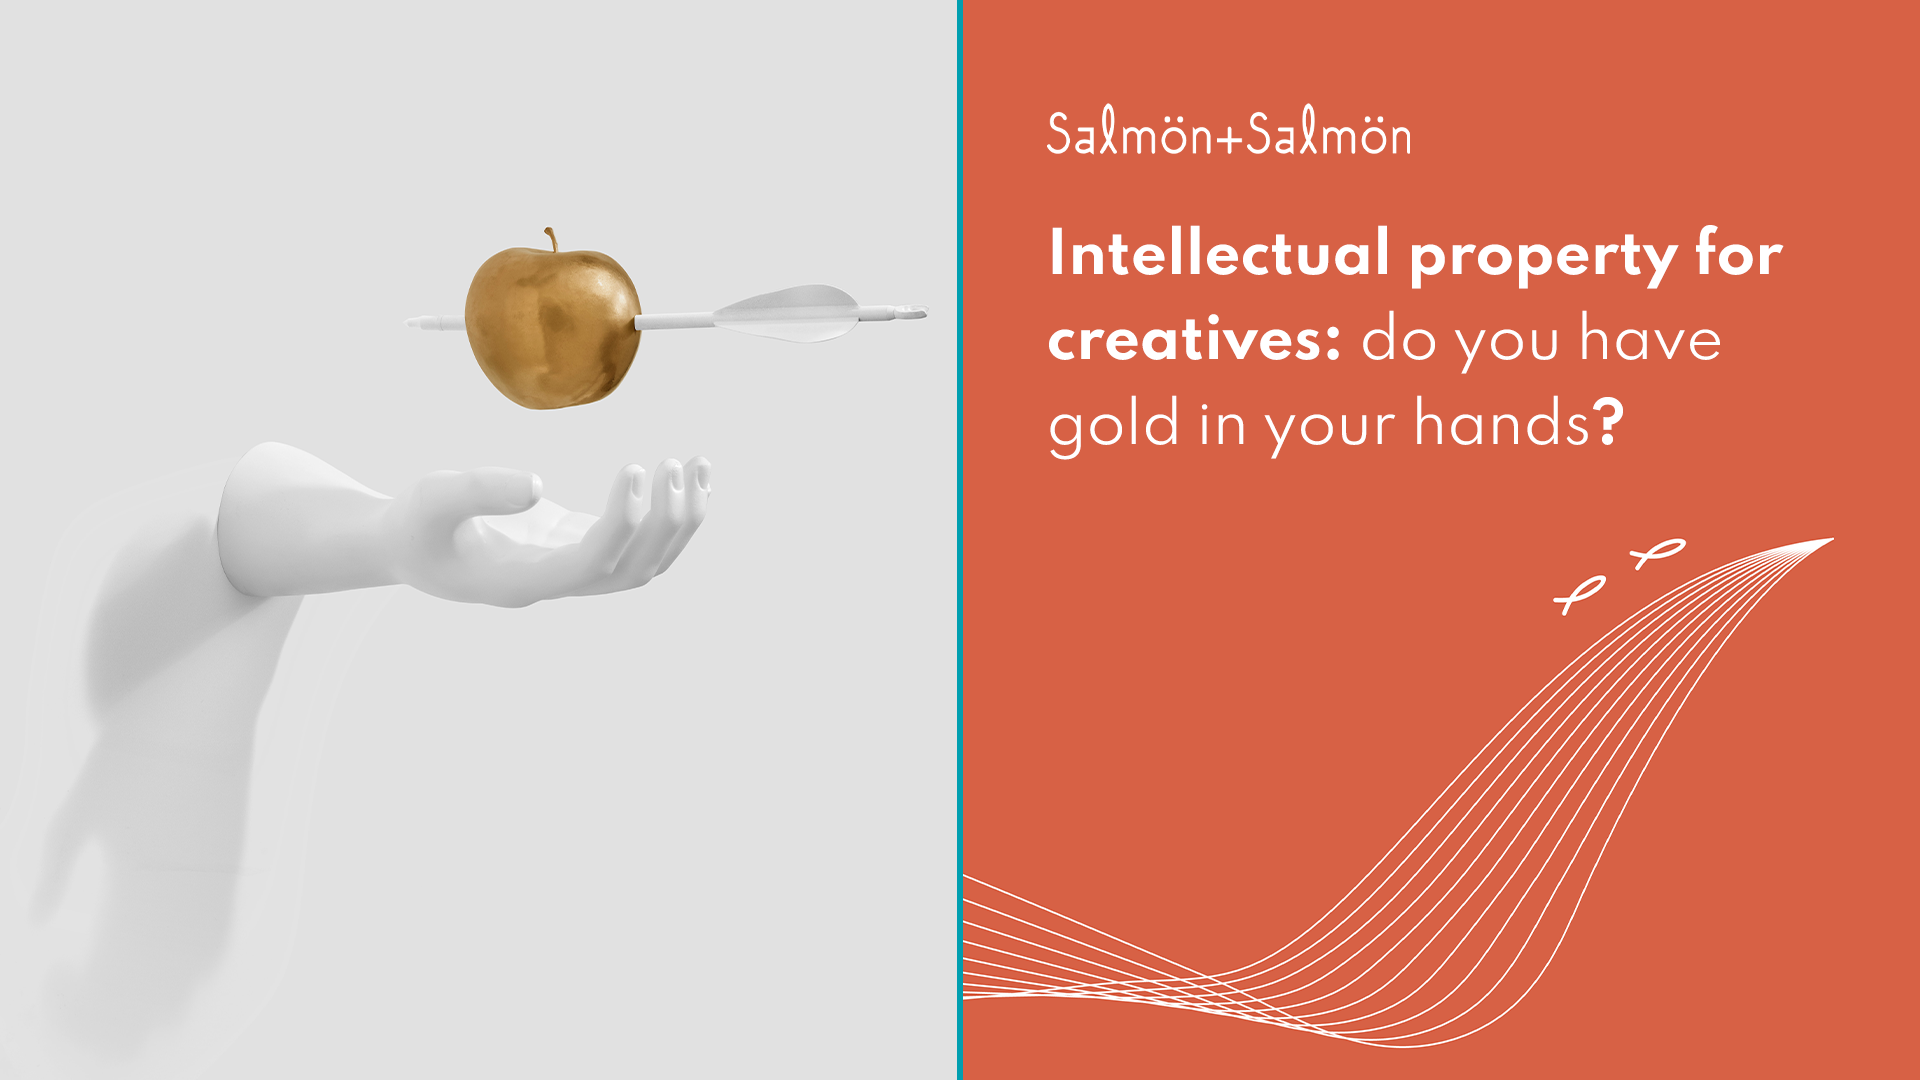 Intellectual property for creatives